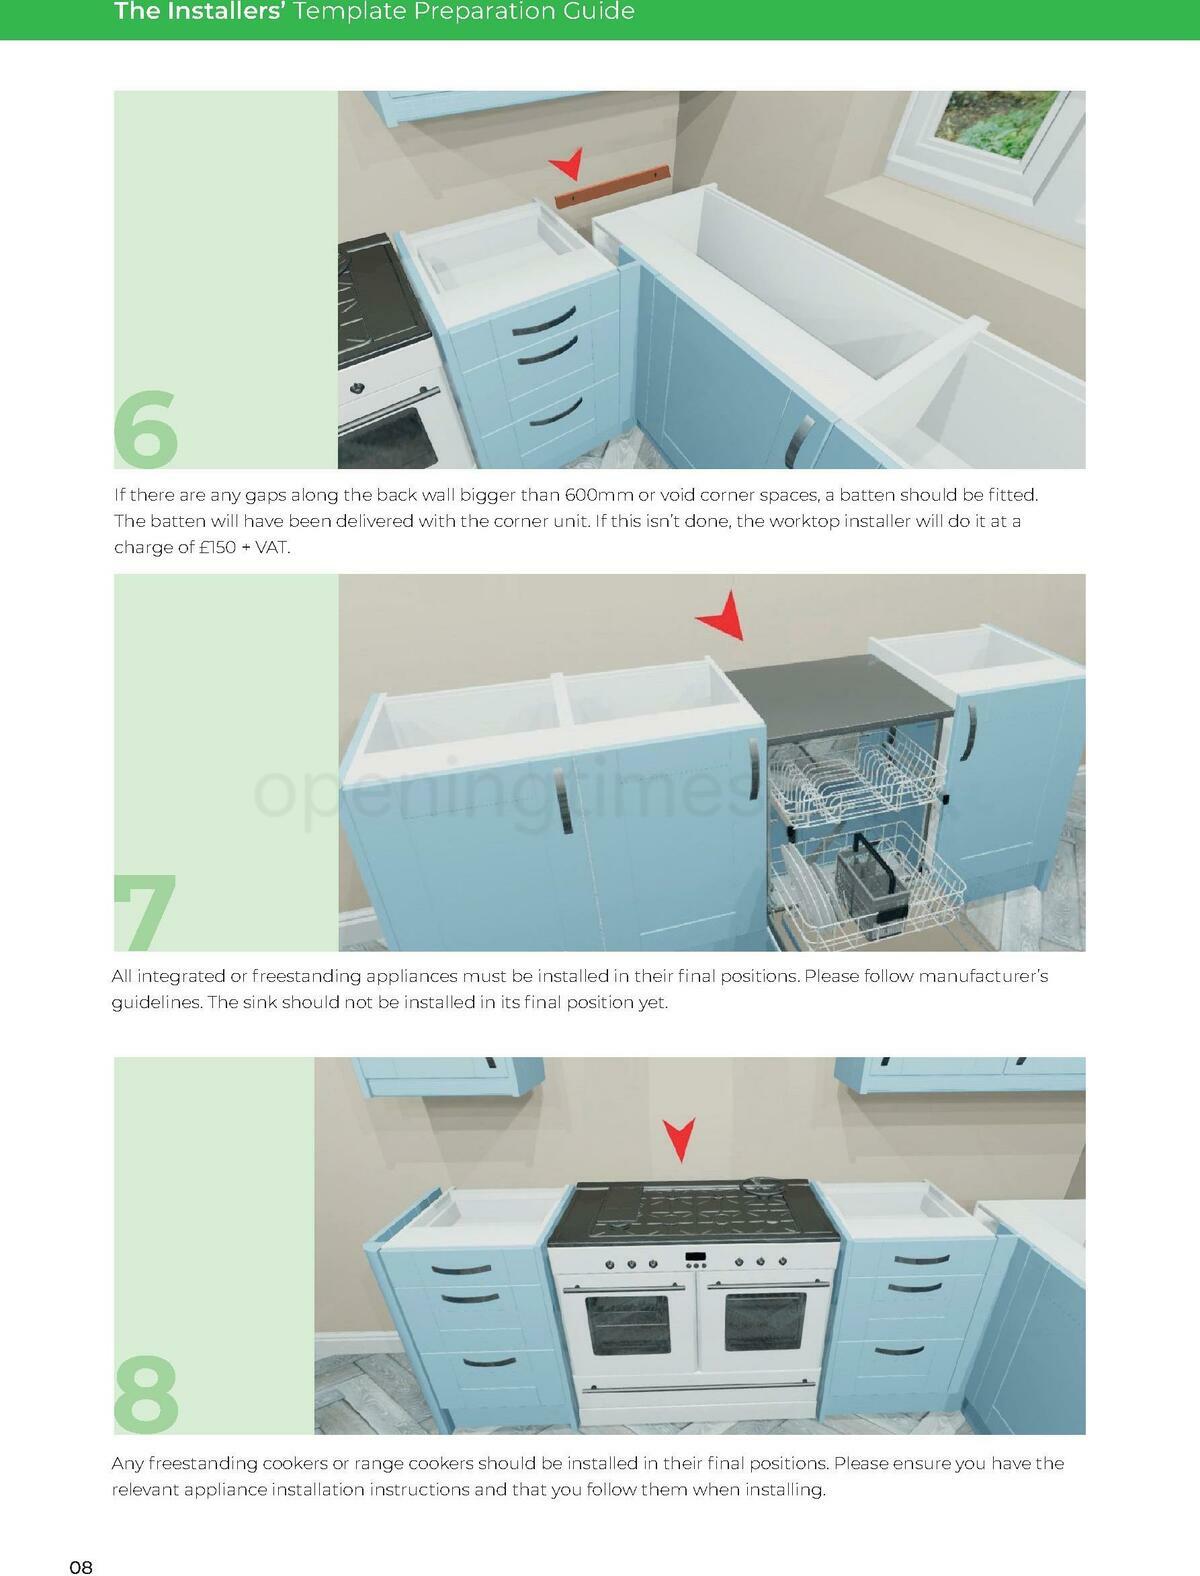 Wren Kitchens Prep Guide Template Offers from 26 October